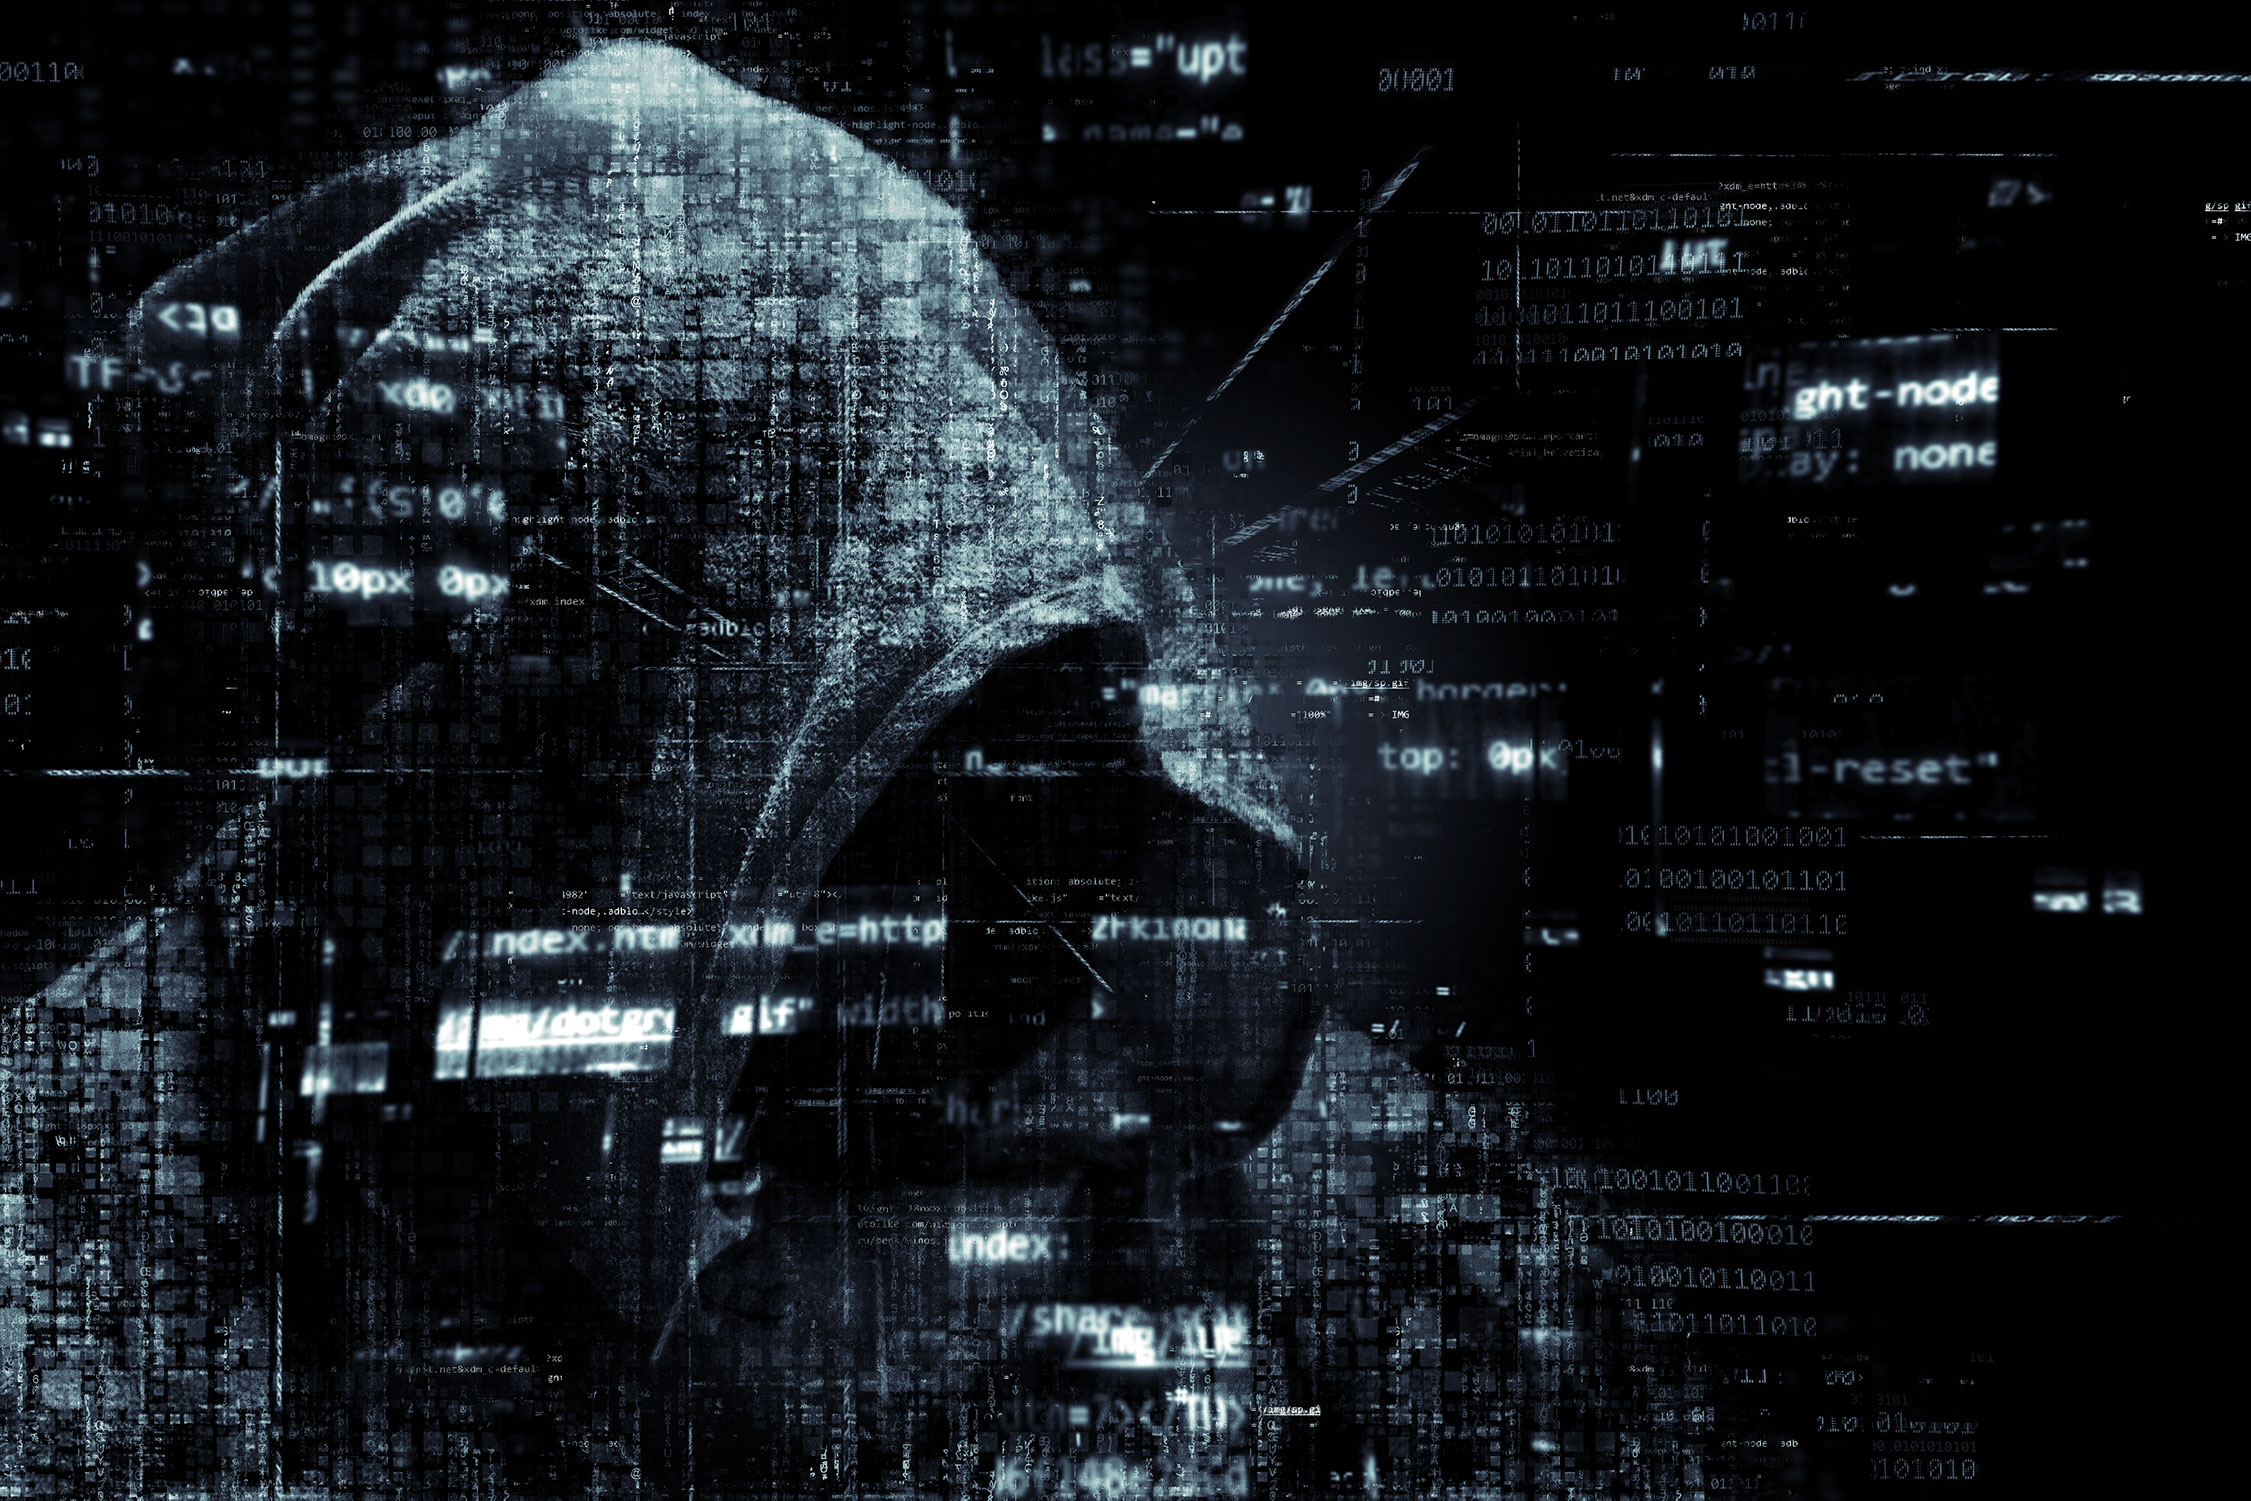 Cyber Attacks and Online Hacking Increasing in New Zealand